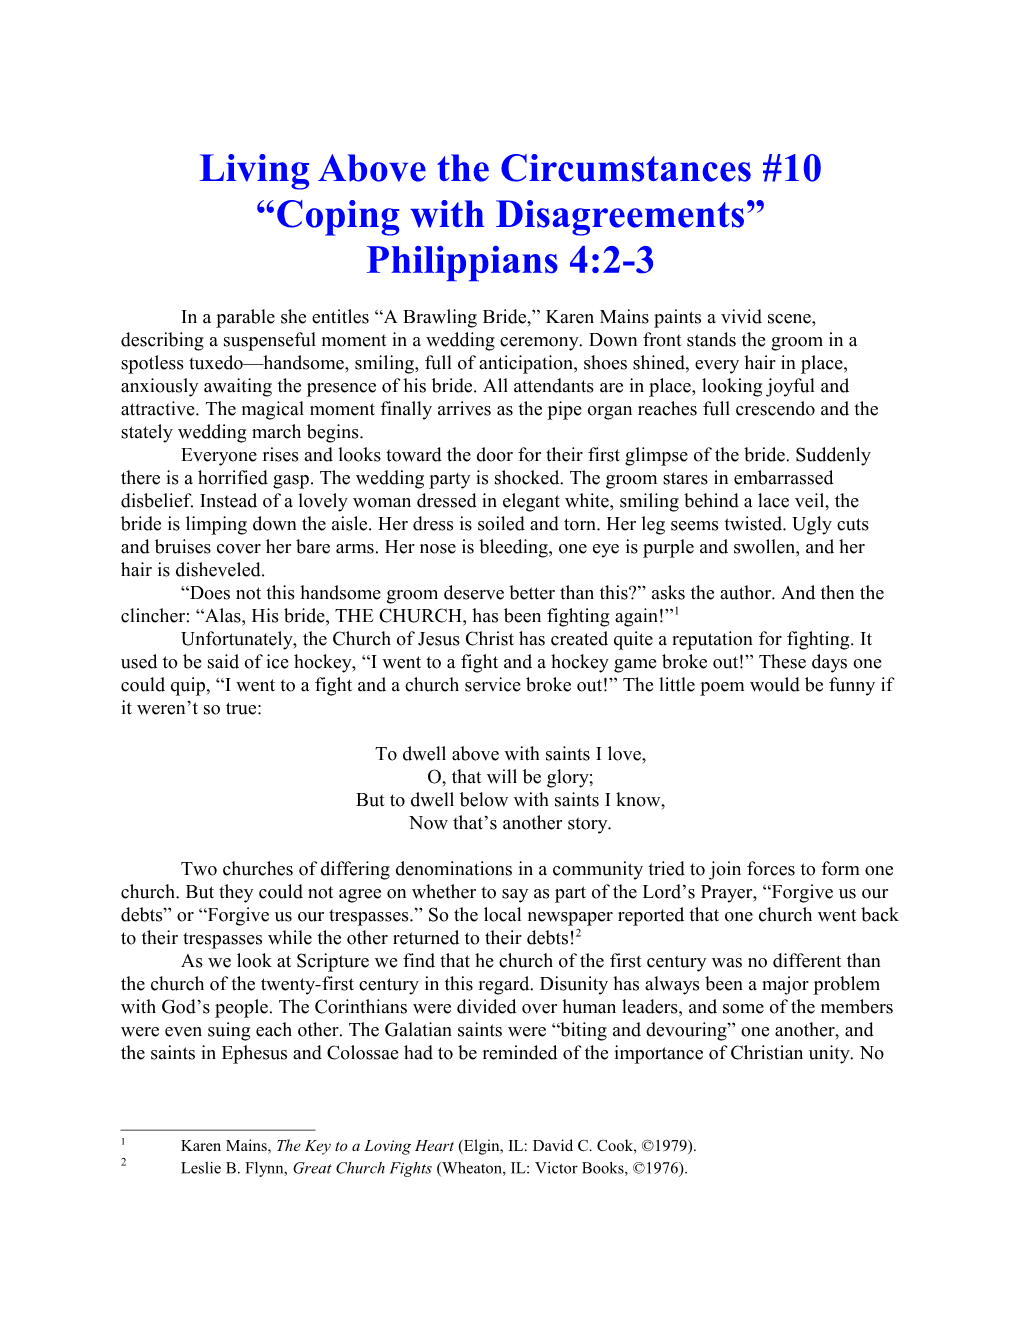 Living Above the Circumstances #9